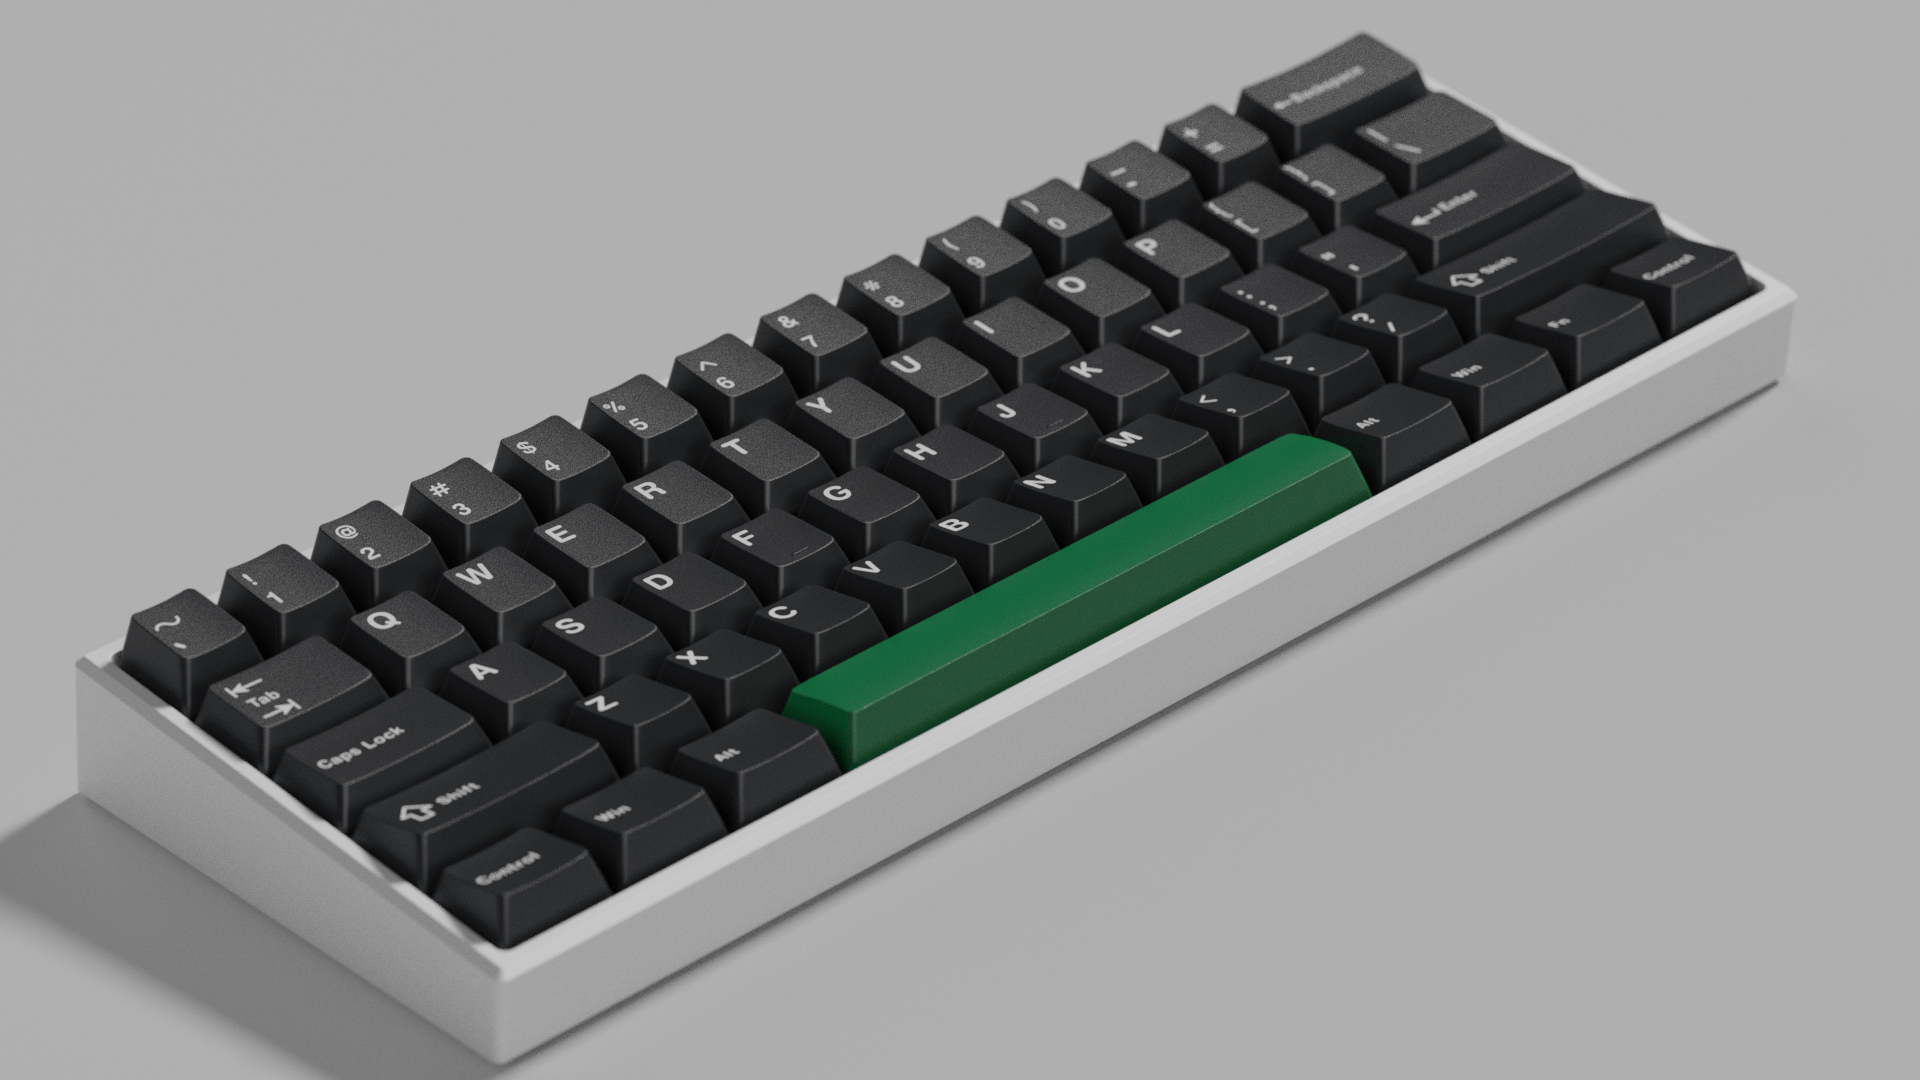 DCS White on Black Keycaps - KeebsForAll